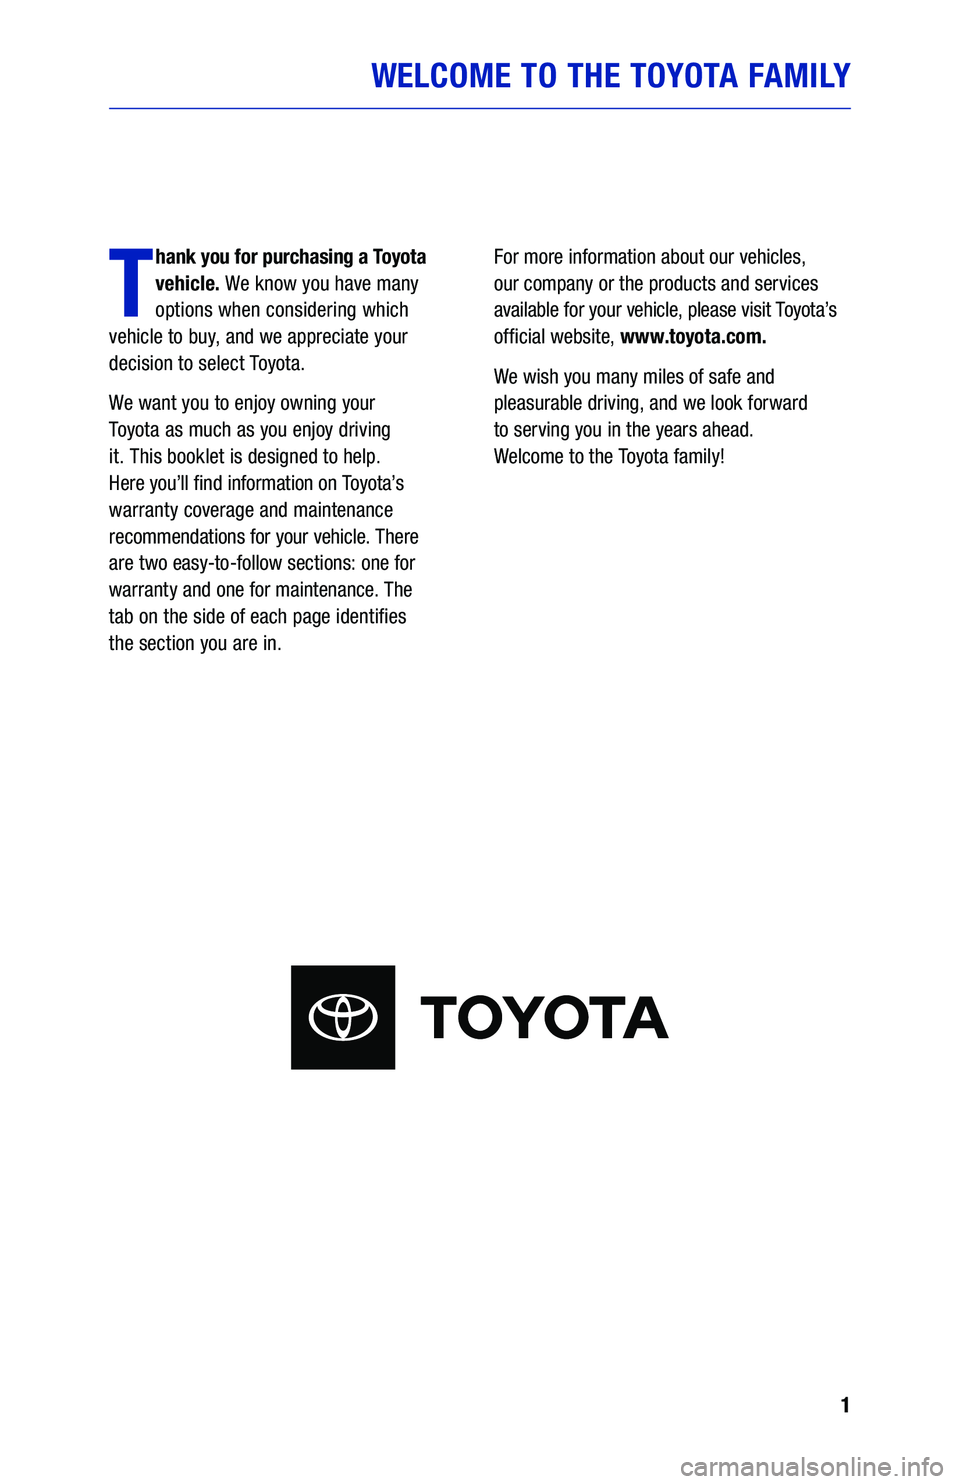 TOYOTA VENZA HYBRID 2021  Warranties & Maintenance Guides (in English) 1
WELCOME TO THE  TOYOTA  FAMILY
T
hank you for purchasing  a Toyota  
vehicle.  We know  you have  many 
options  when considering  which  
vehicle  to buy,  and we appreciate  your 
decision  to sel